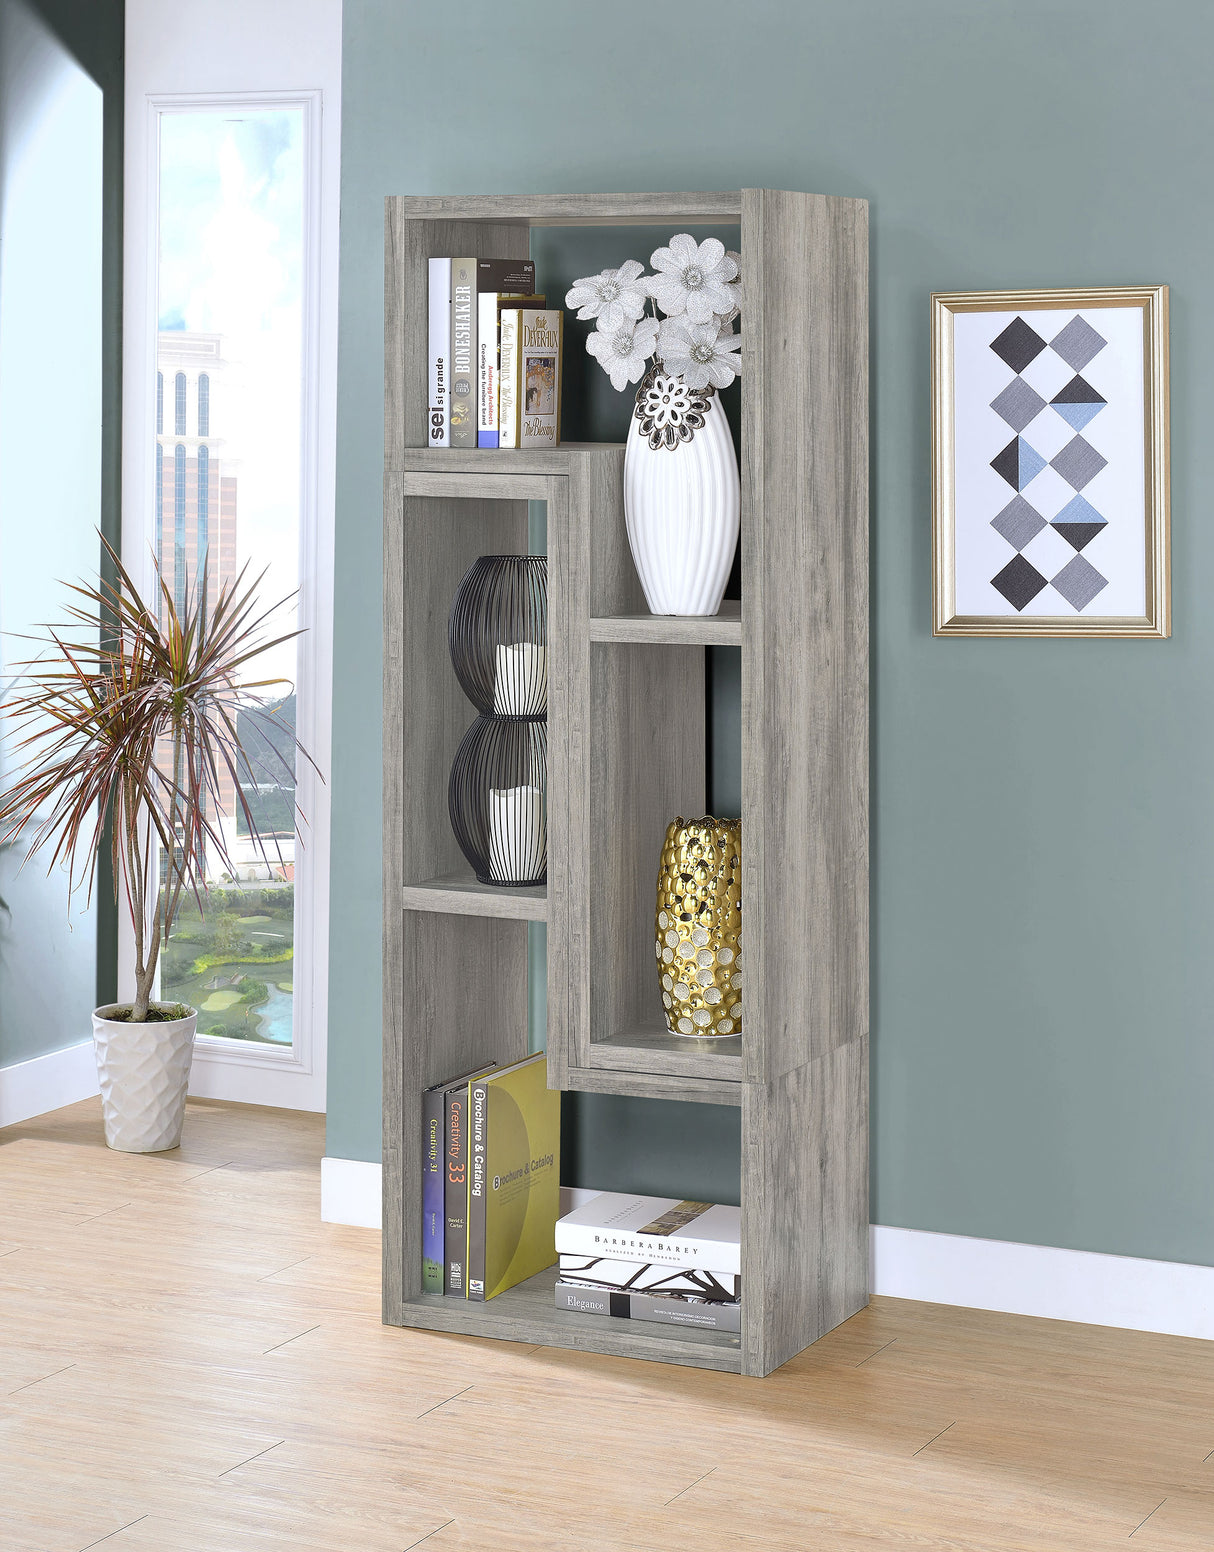 Bookcase / Tv Stand - Velma Convertable Bookcase and TV Console Grey Driftwood